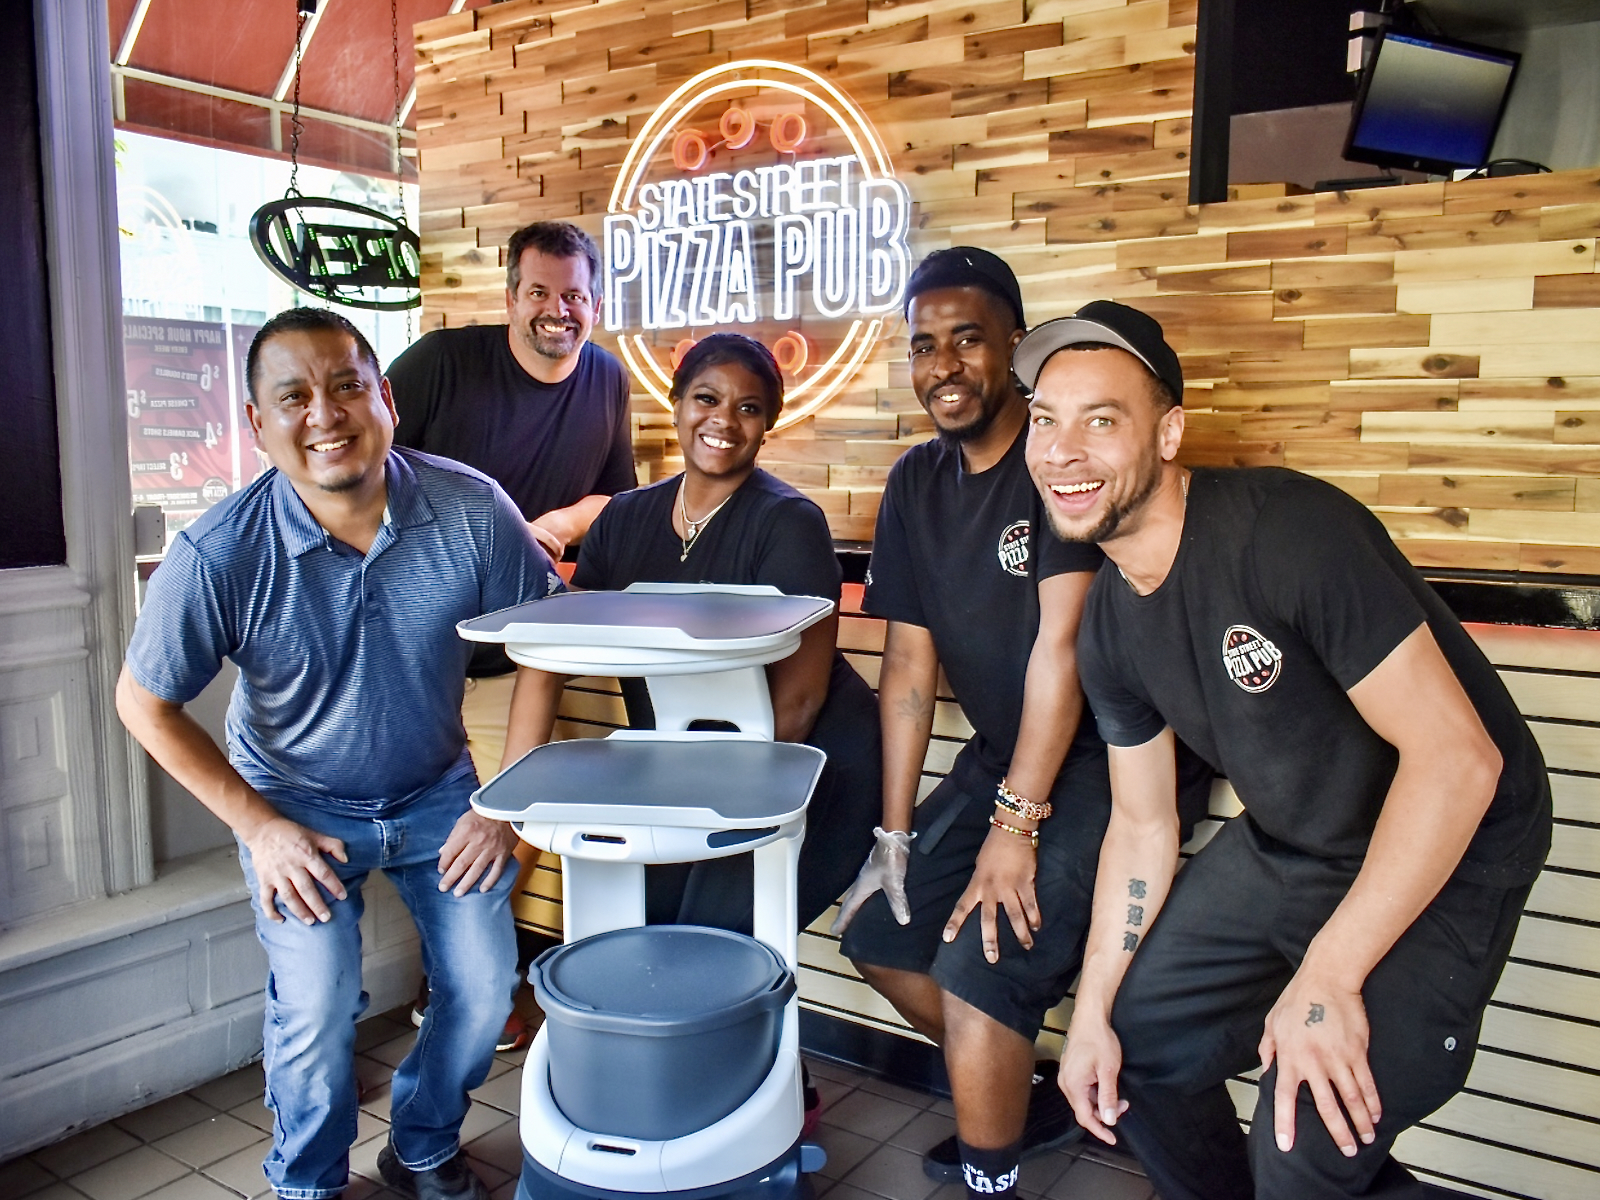 Feeling clever? Can you name State Street Pizza Pub's new service robot?